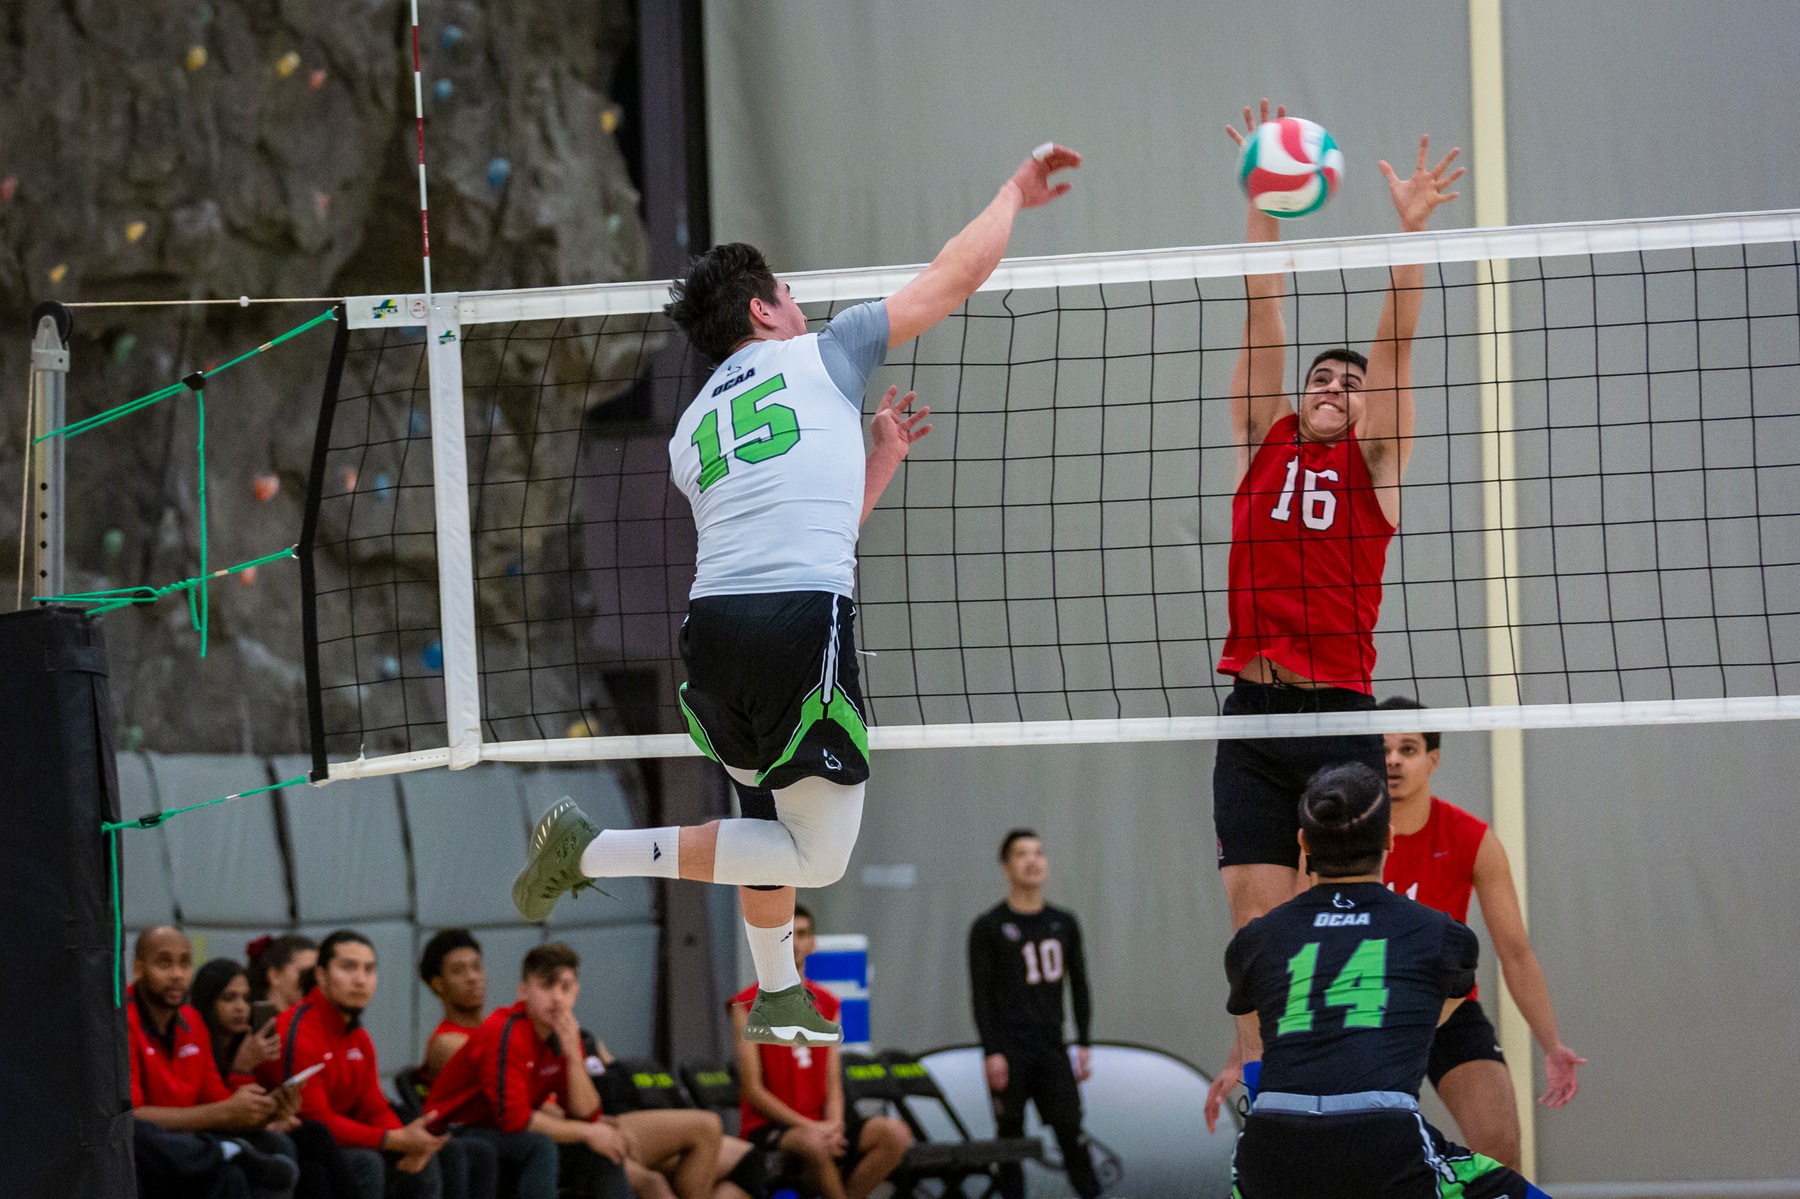 Jason Fillion of the Centennial Colts goes up for a kill during game action against the Seneca Sting at the Athletic and Wellness Centre. Fillion had a game high 15 points for the Colts in defeat. (John Theurer/Colts Media)